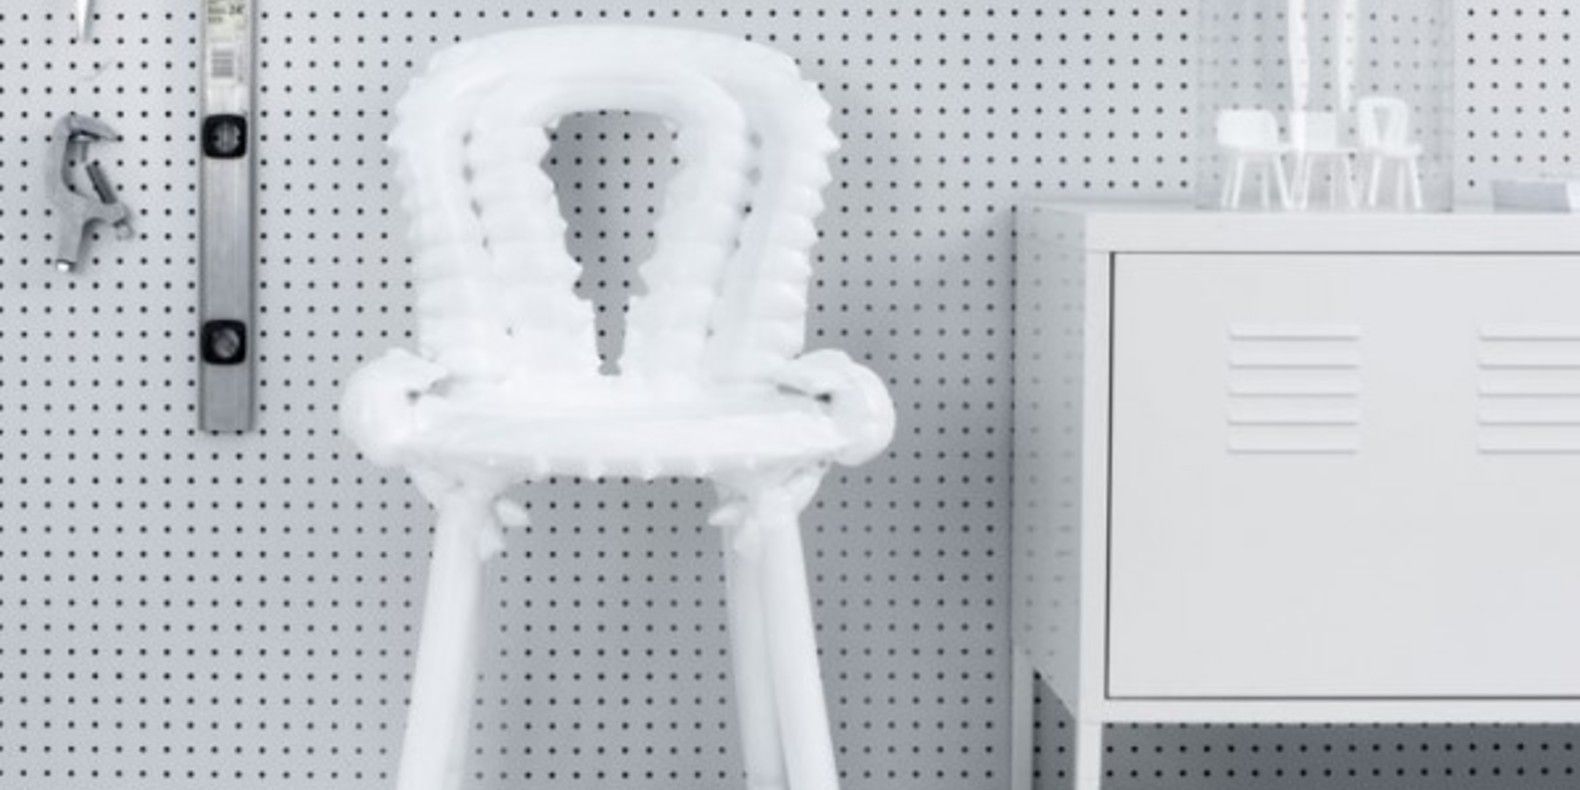 The perfect chair is 3D printed